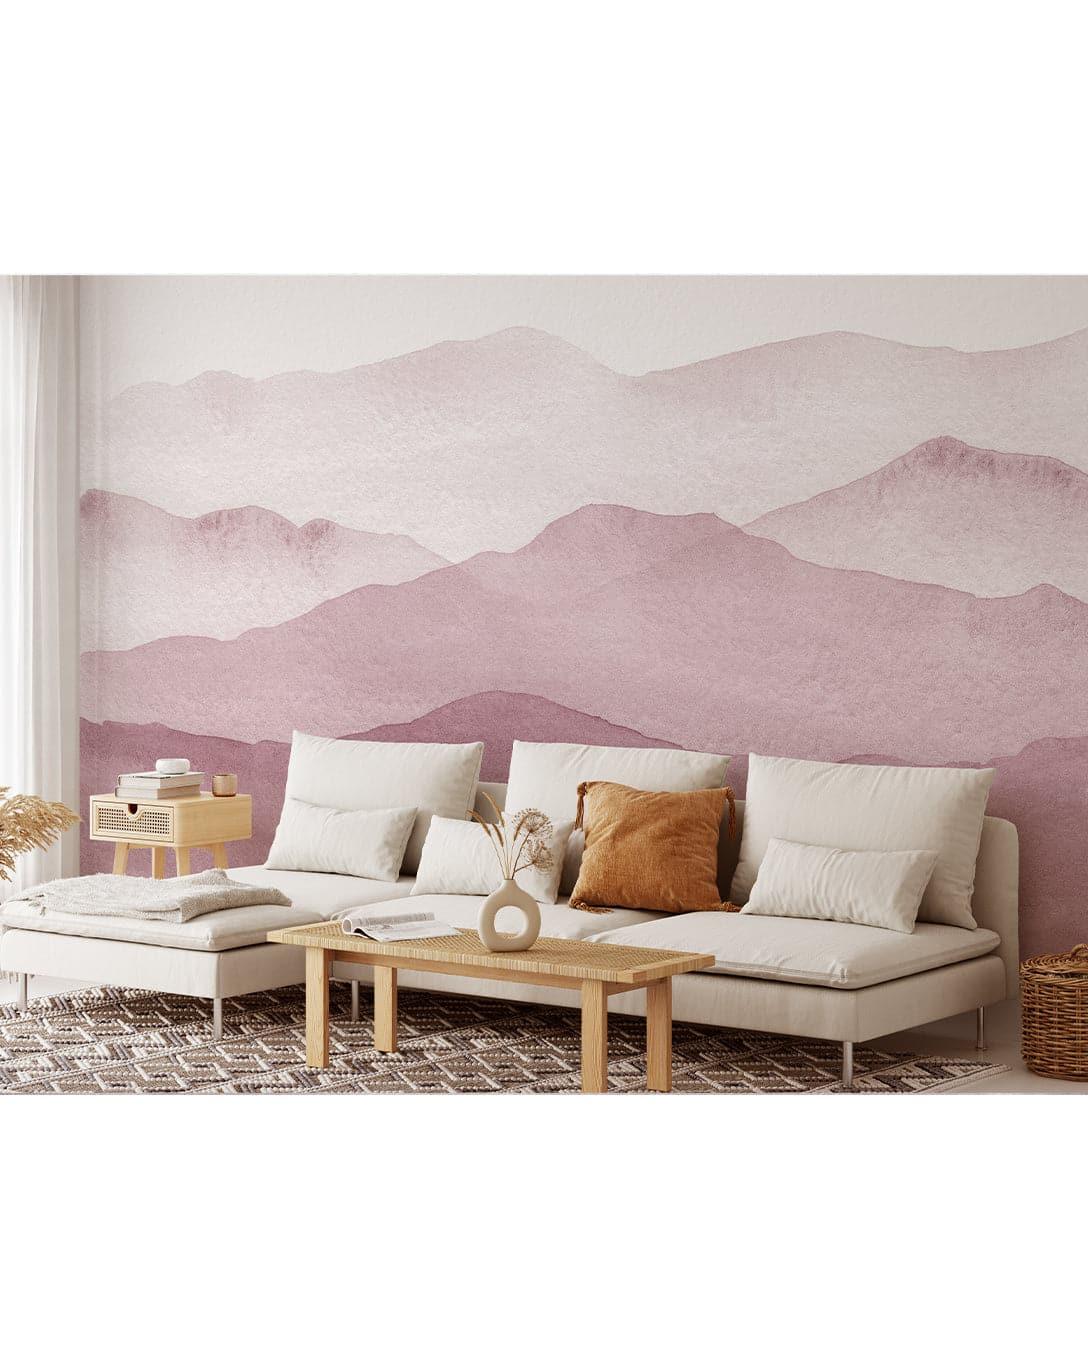 Pink Watercolor Abstract Mountains Mural Pink Watercolor Abstract Mountains Mural 